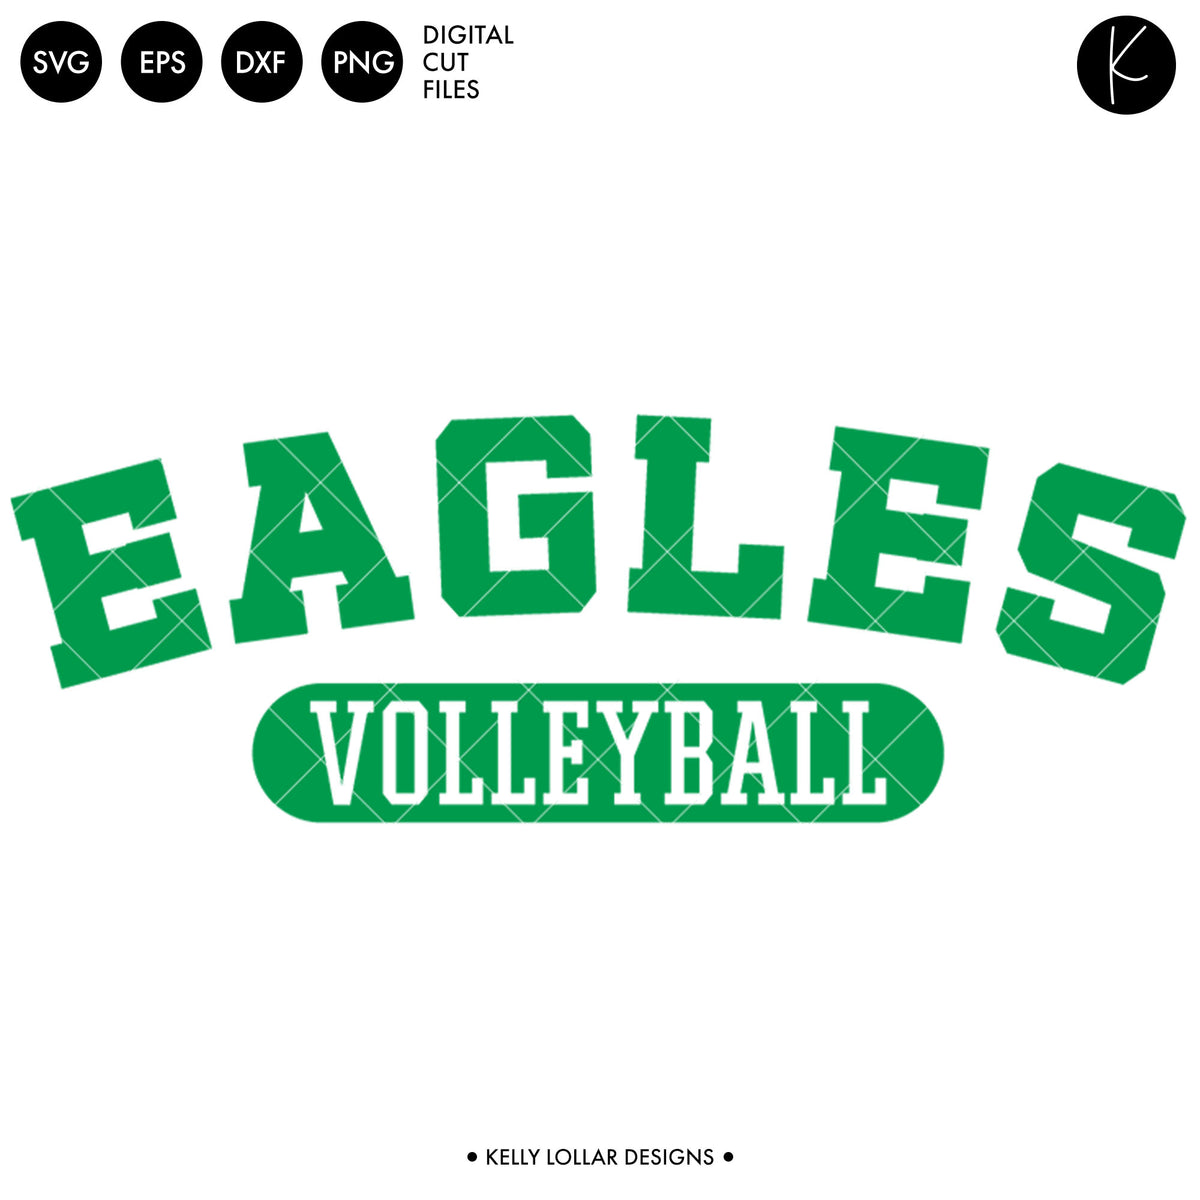 Eagles Volleyball Bundle | SVG DXF EPS PNG Cut Files